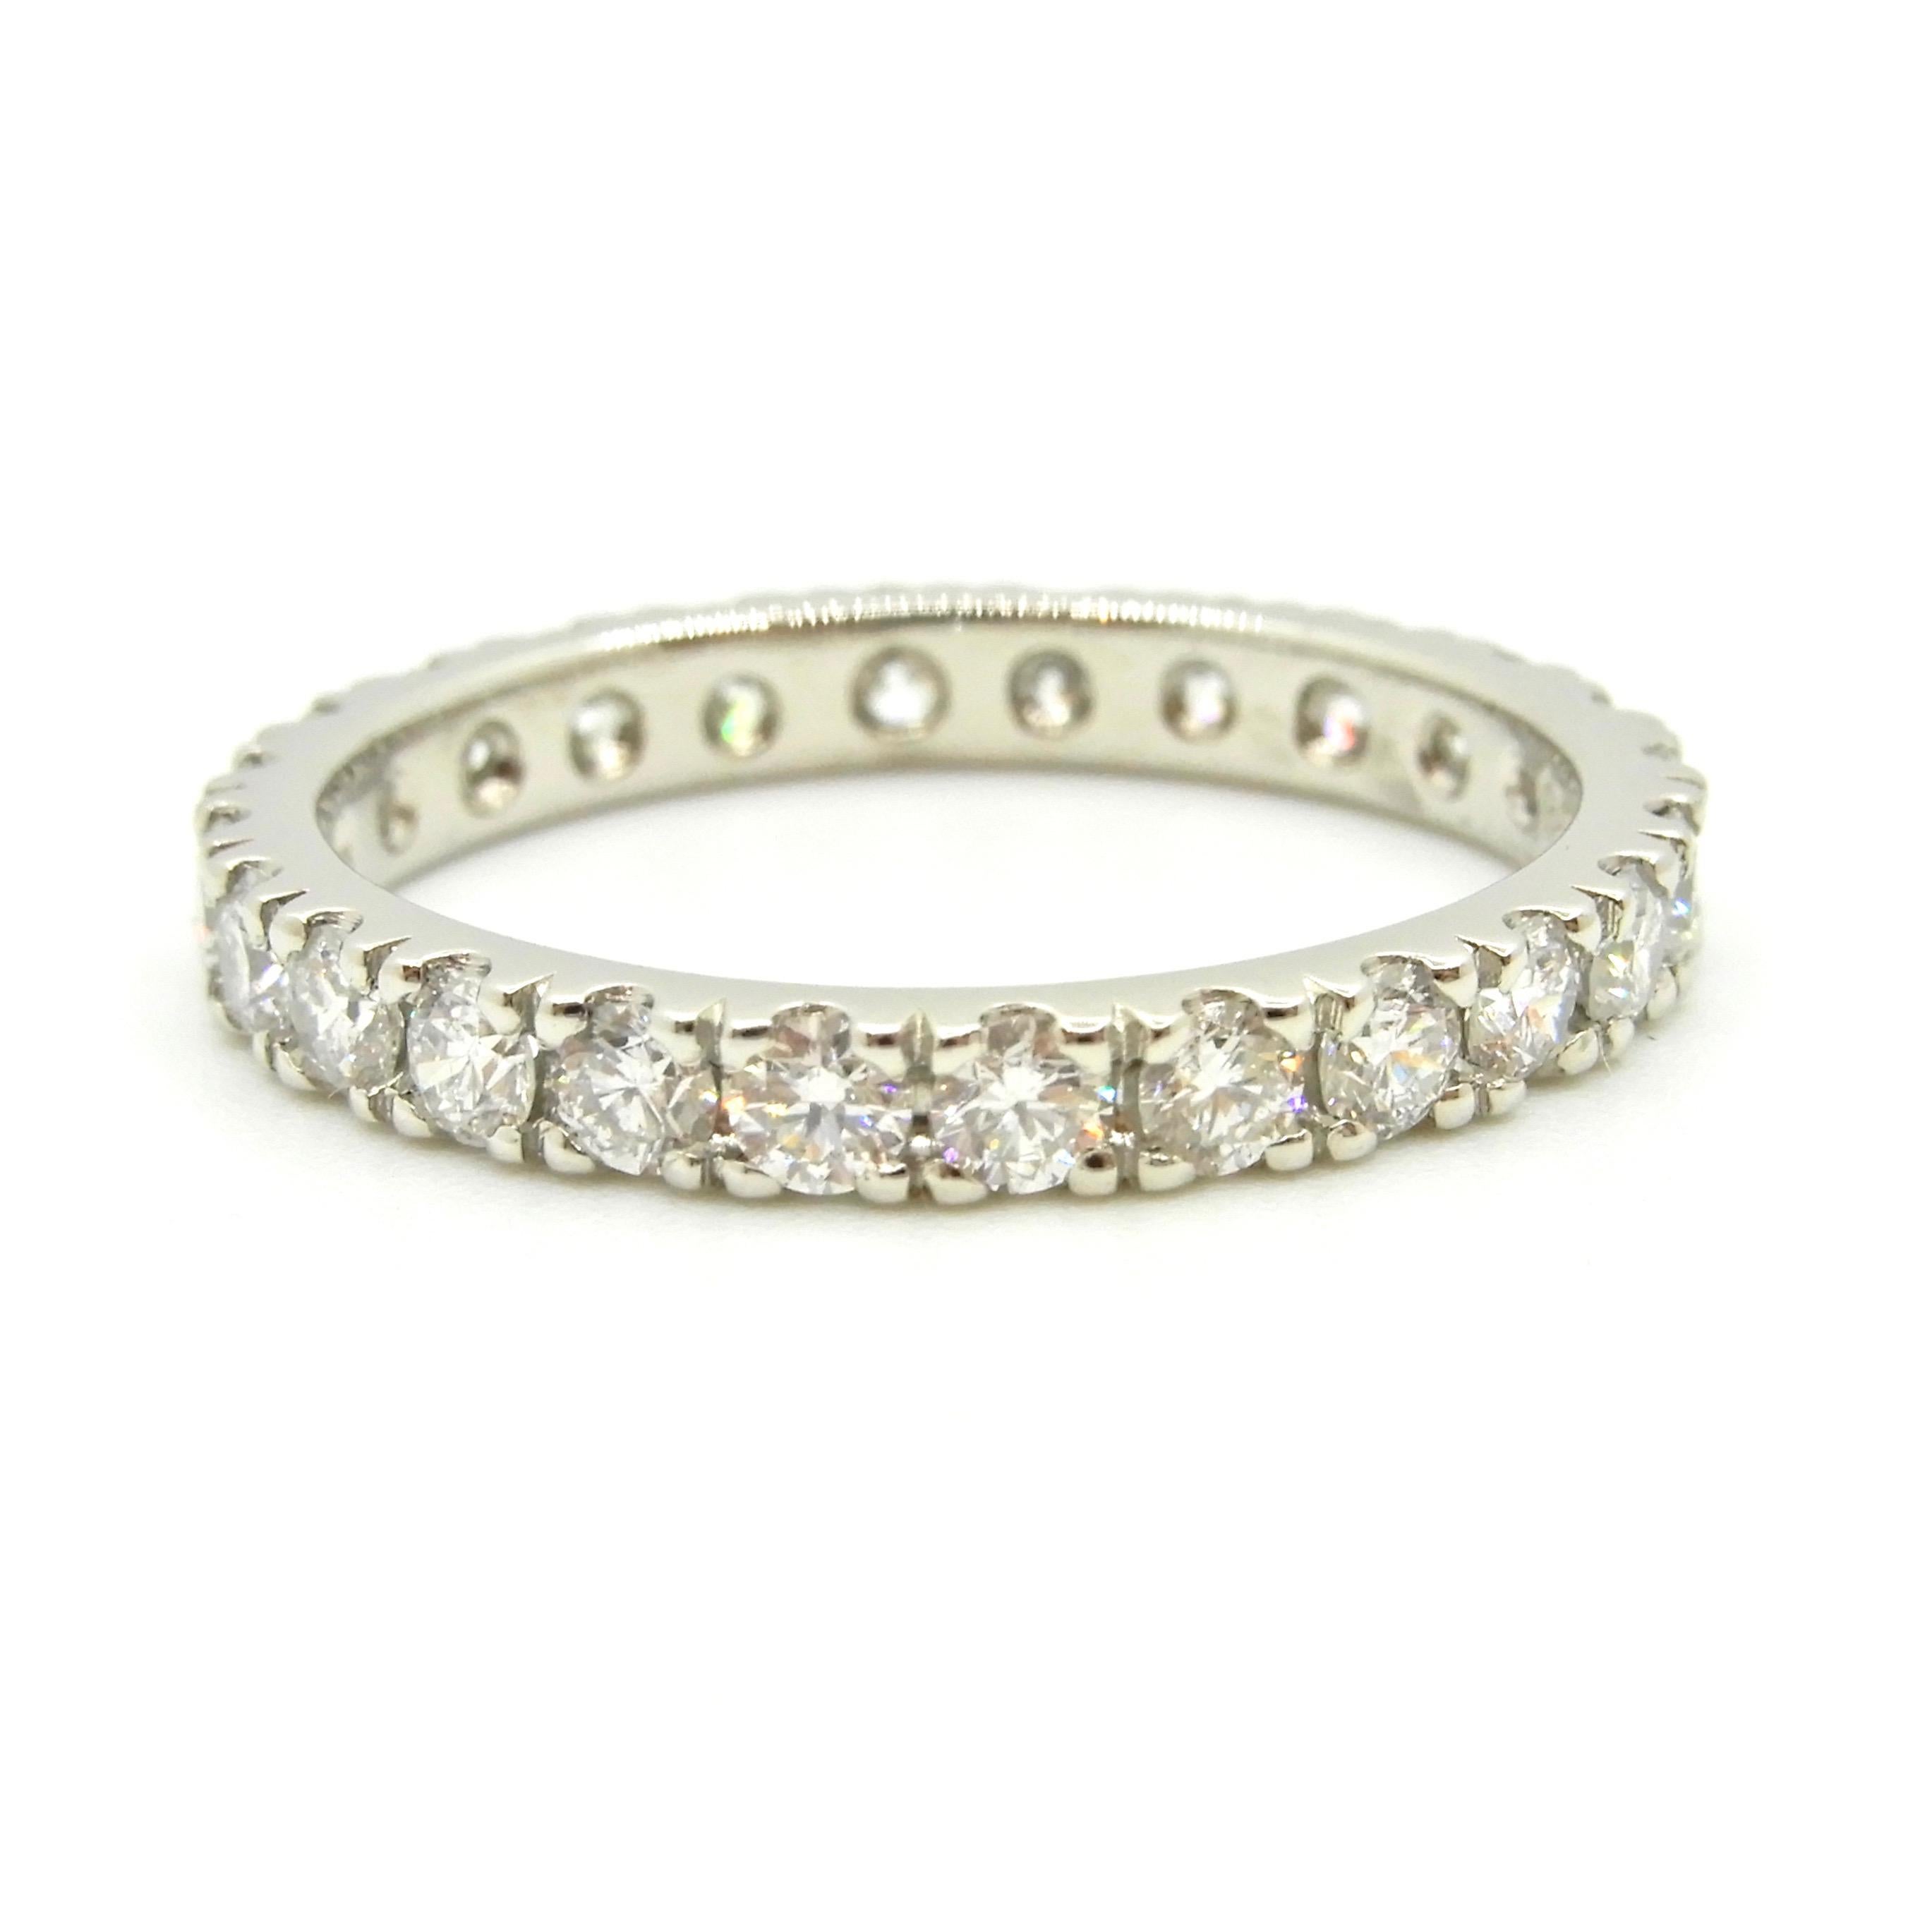 This stunning 1.44 carat diamond and platinum full eternity band ring is scallop claw set. It features 24 x 2.5mm round brilliant cut Diamonds of G colour SI clarity. The infinity ring is the perfect wedding ring, celebration ring or eternity